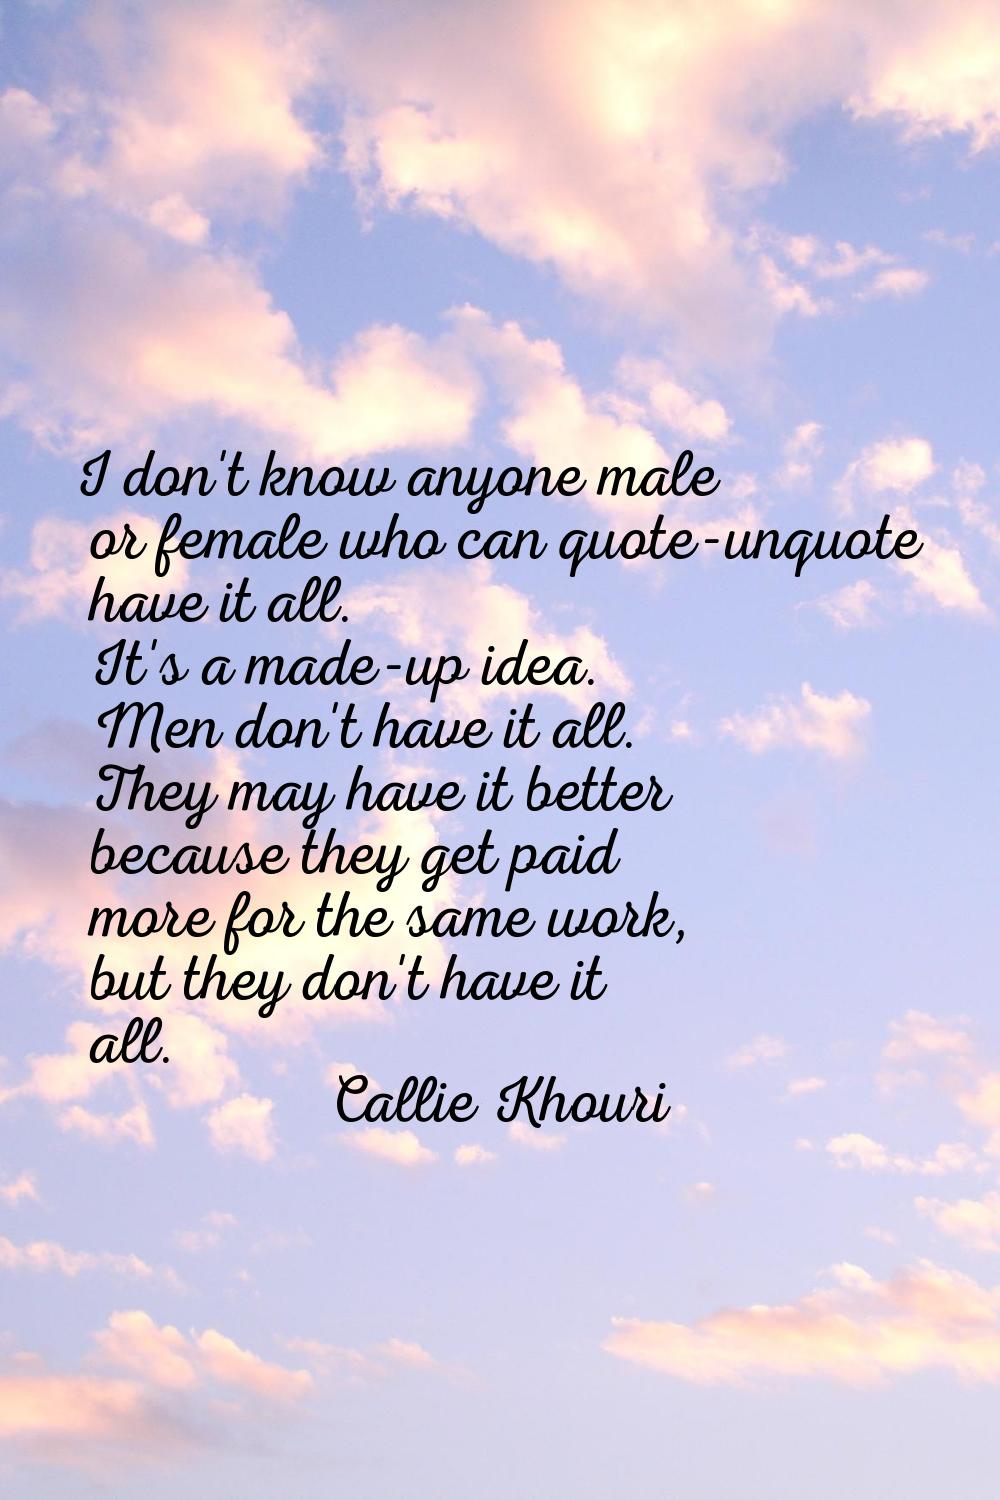 I don't know anyone male or female who can quote-unquote have it all. It's a made-up idea. Men don'